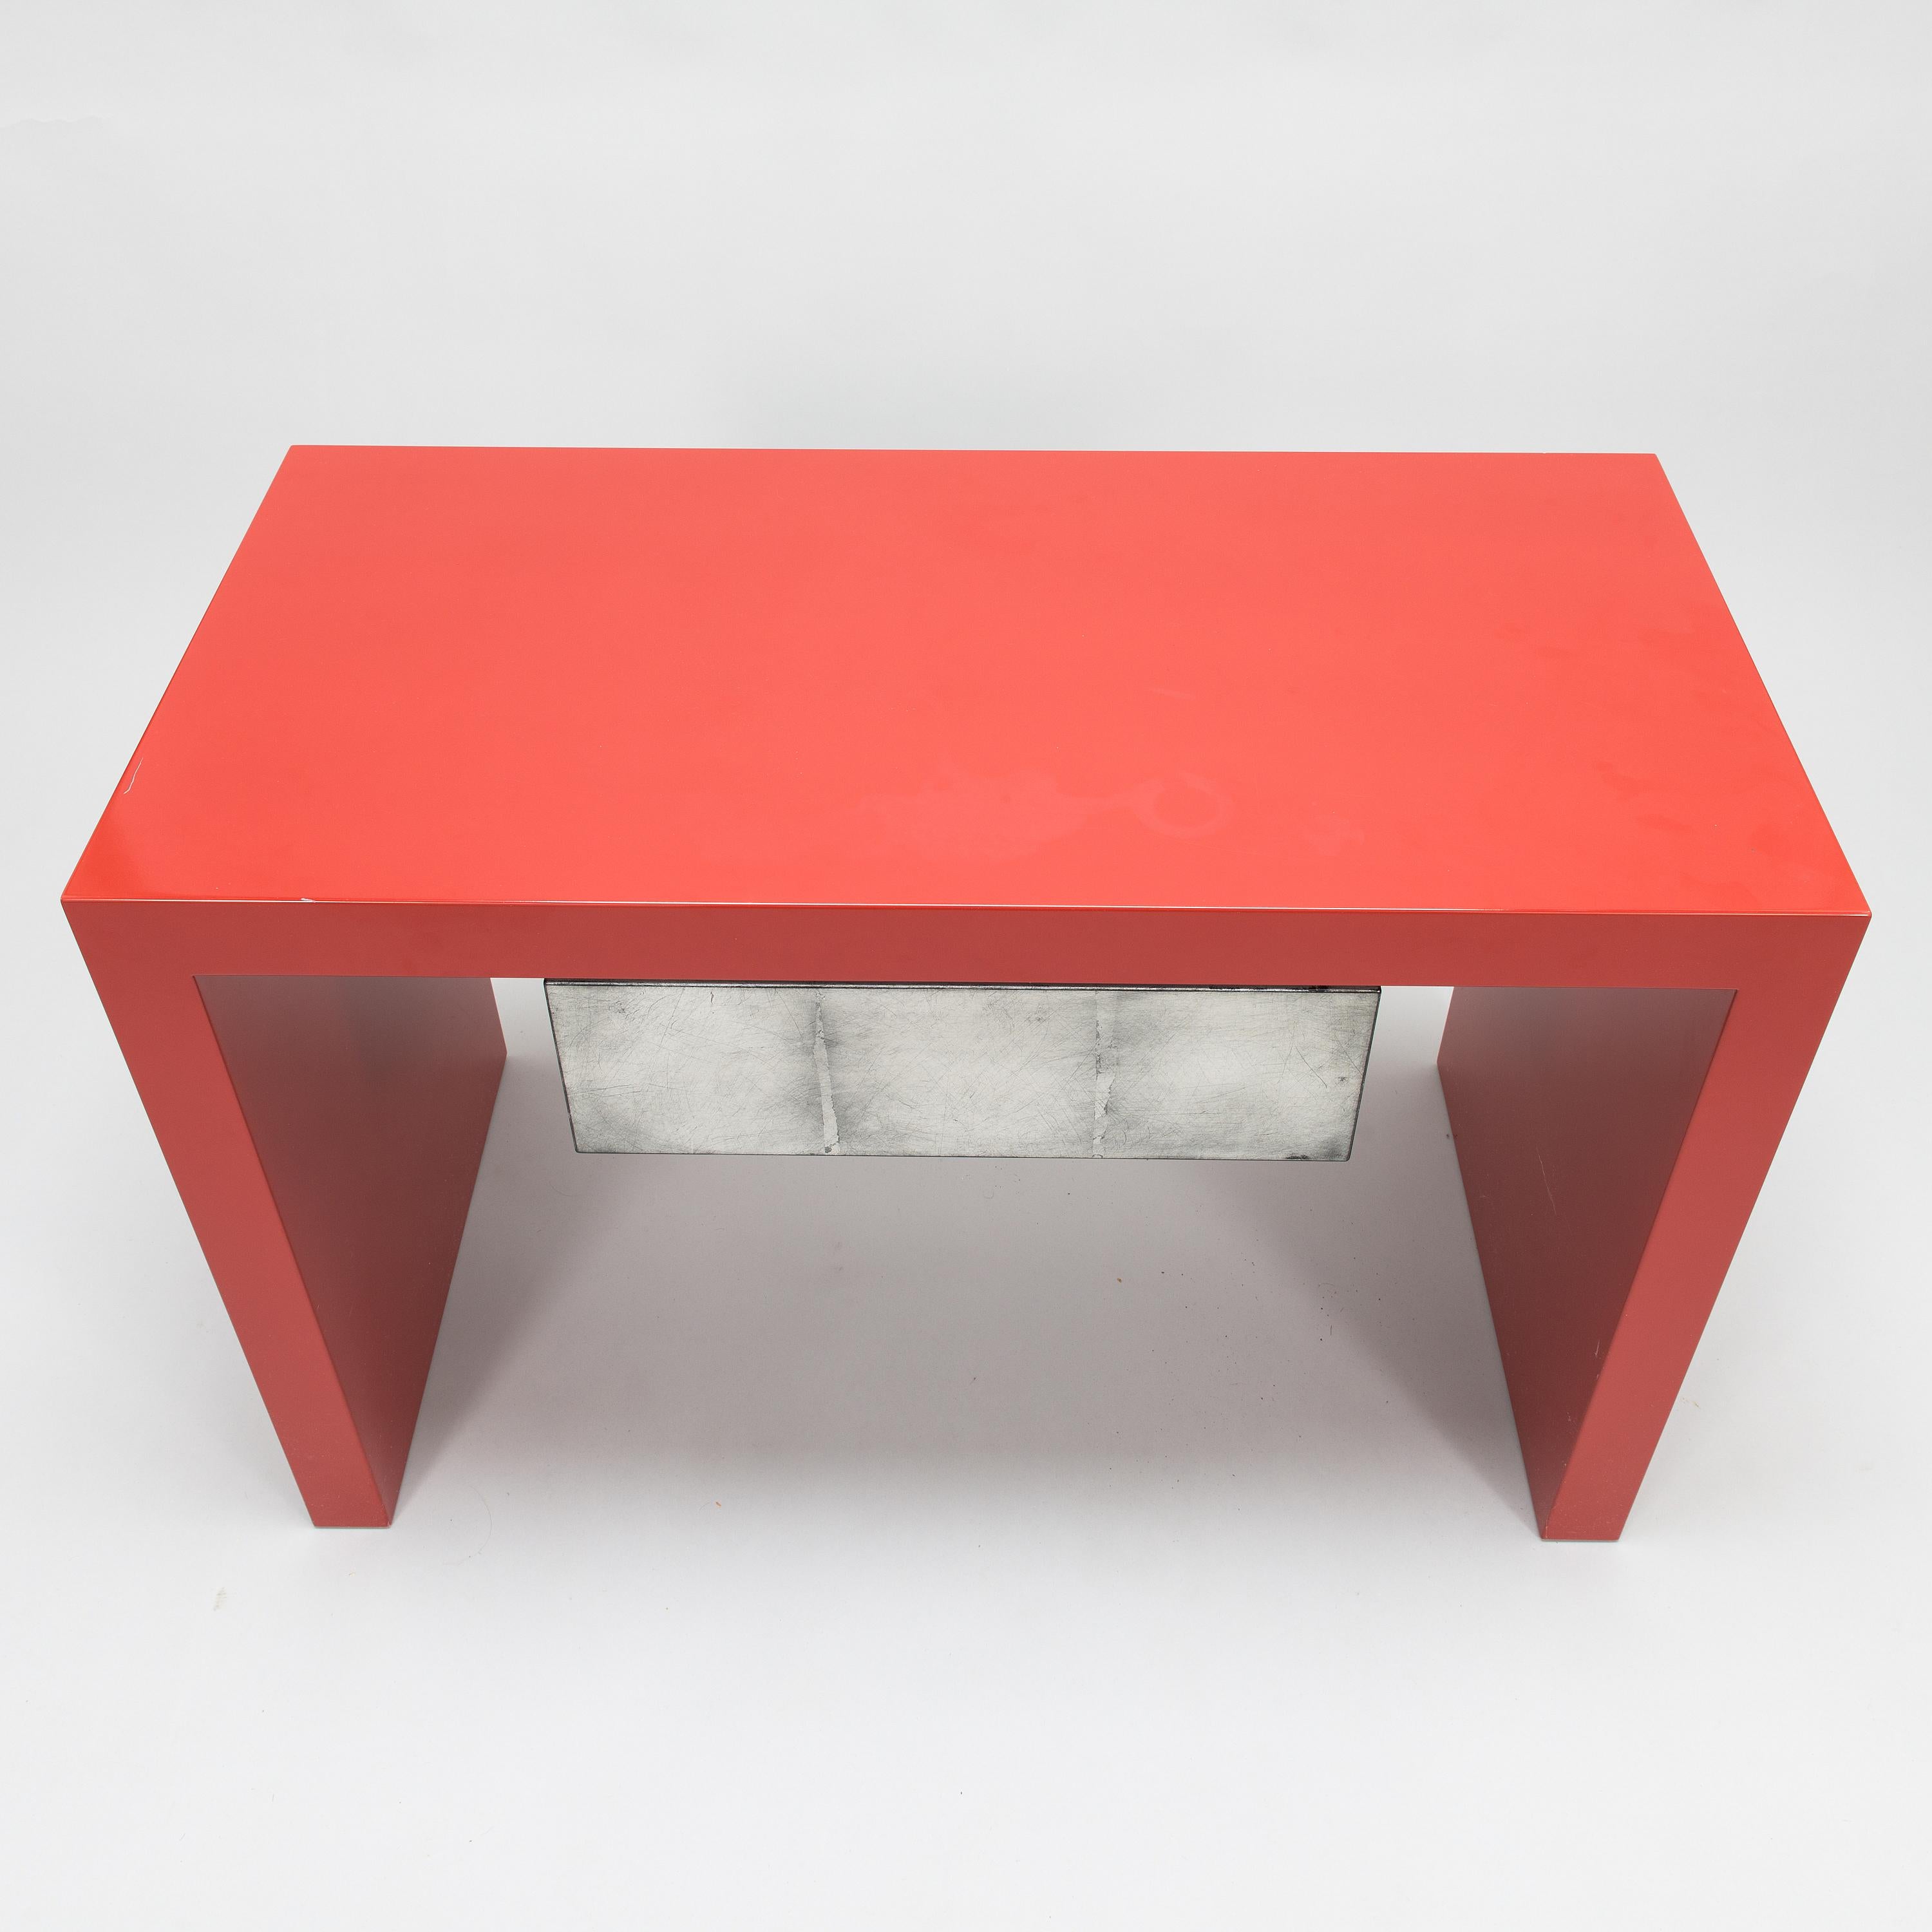 A pair of tables nightstand  by Kaisa Blomstedt 
Made to order by the Designer . With pull-out drawer. Red laquered and leaf nickeled MDF.
This beautiful pair of nightstand , custom made for a special project, has been carefully handcrafted in red